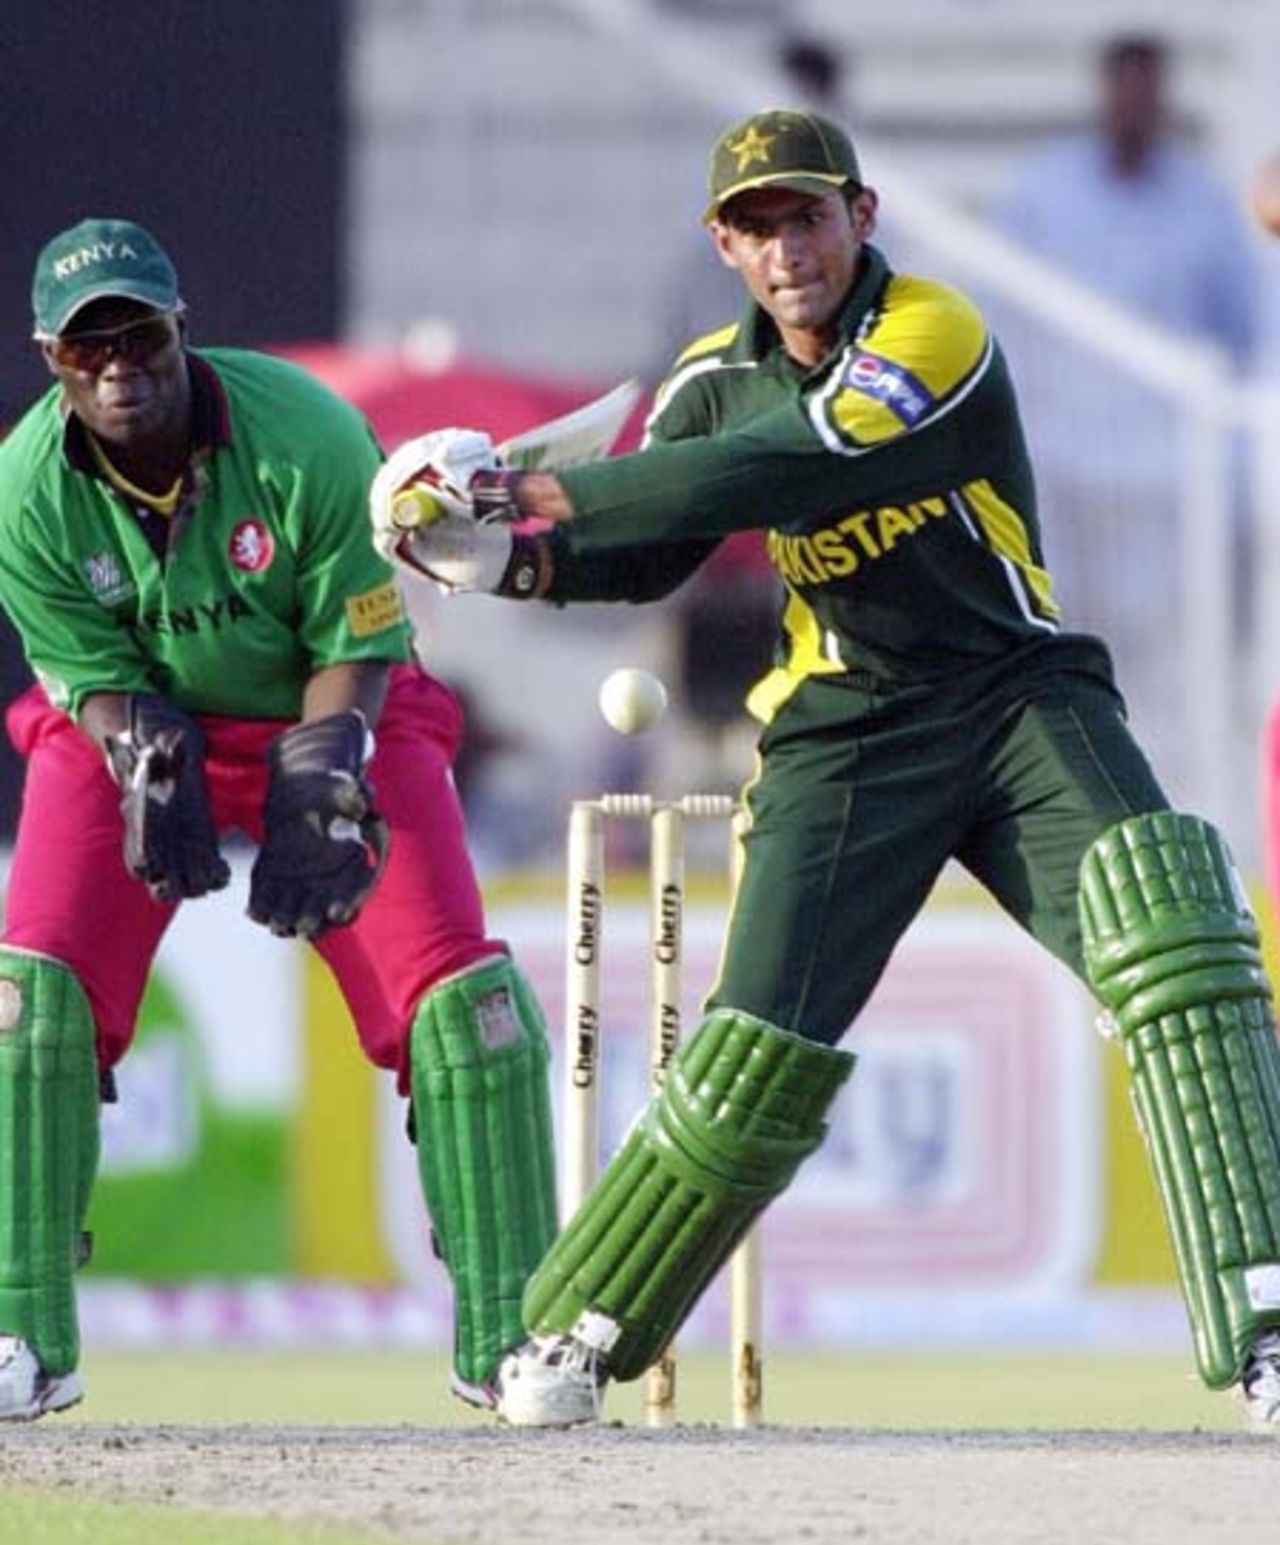 Pakistani middle order batsman and top scorer Shoaib Malik (C) plays a ball during his fine inning of 76 against Kenya in the Four Nation Sharjah Cricket Tournament, 08 April 2003.